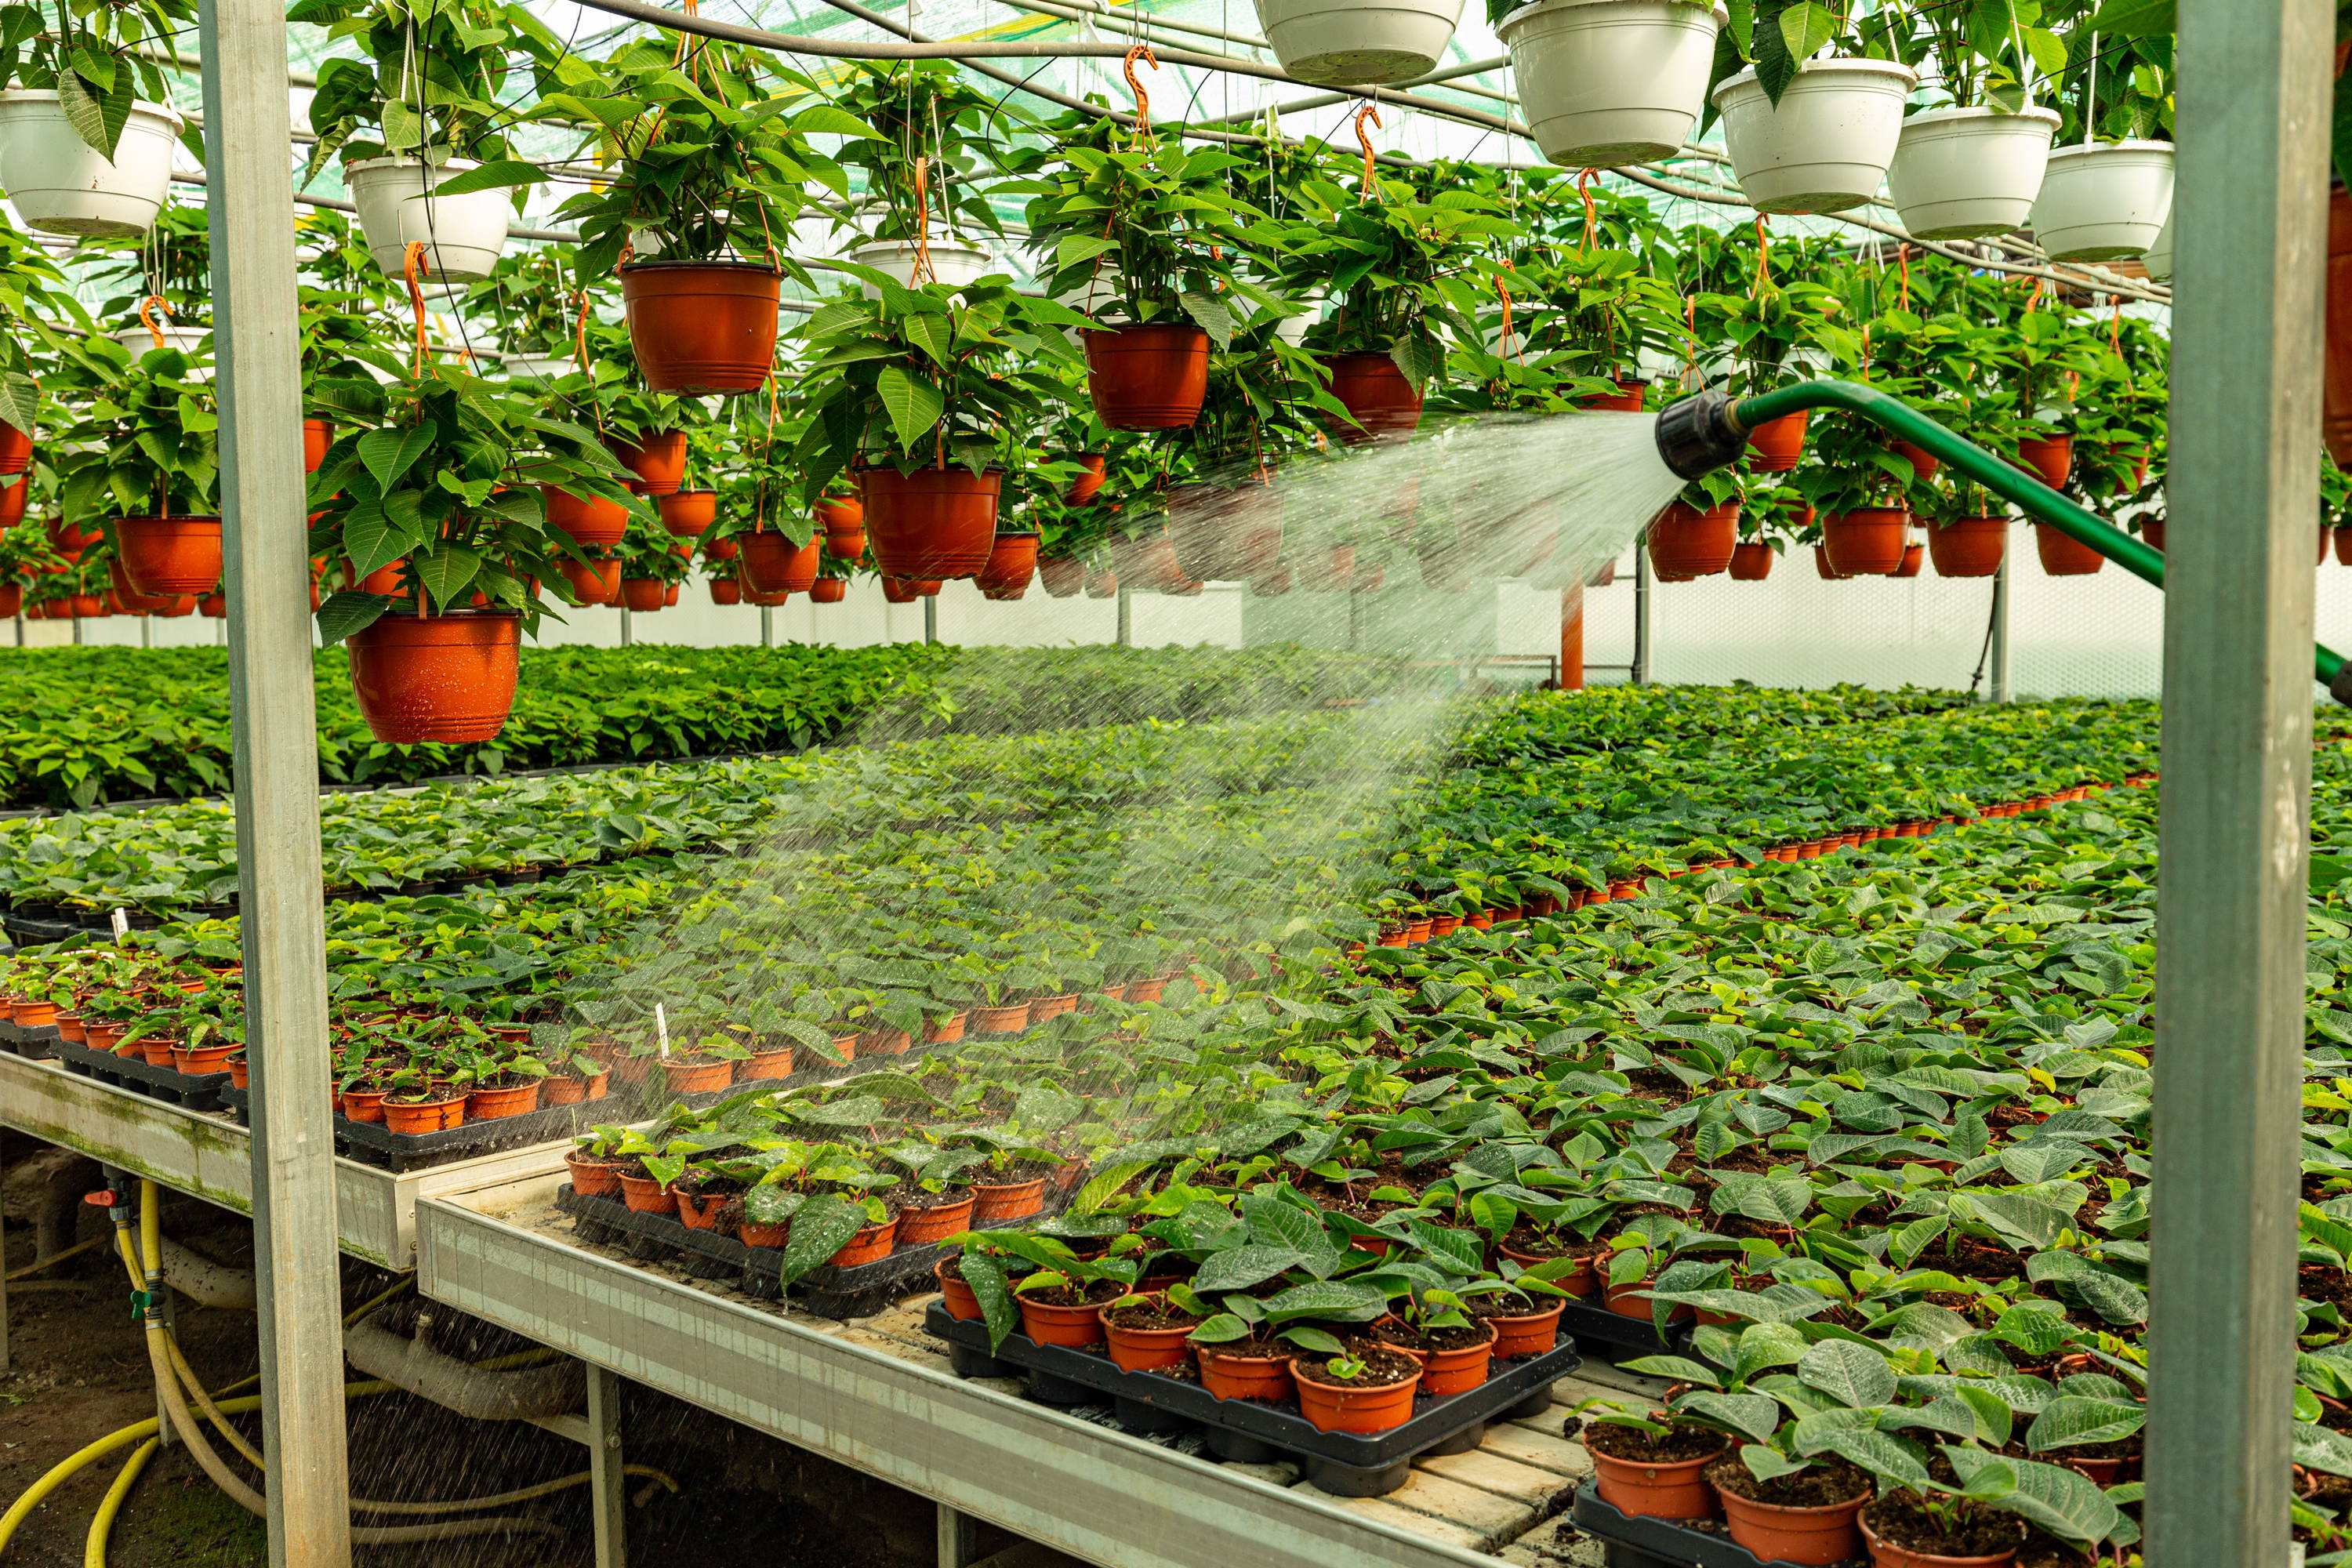 Image of a large commercial grower using clean water on plants.